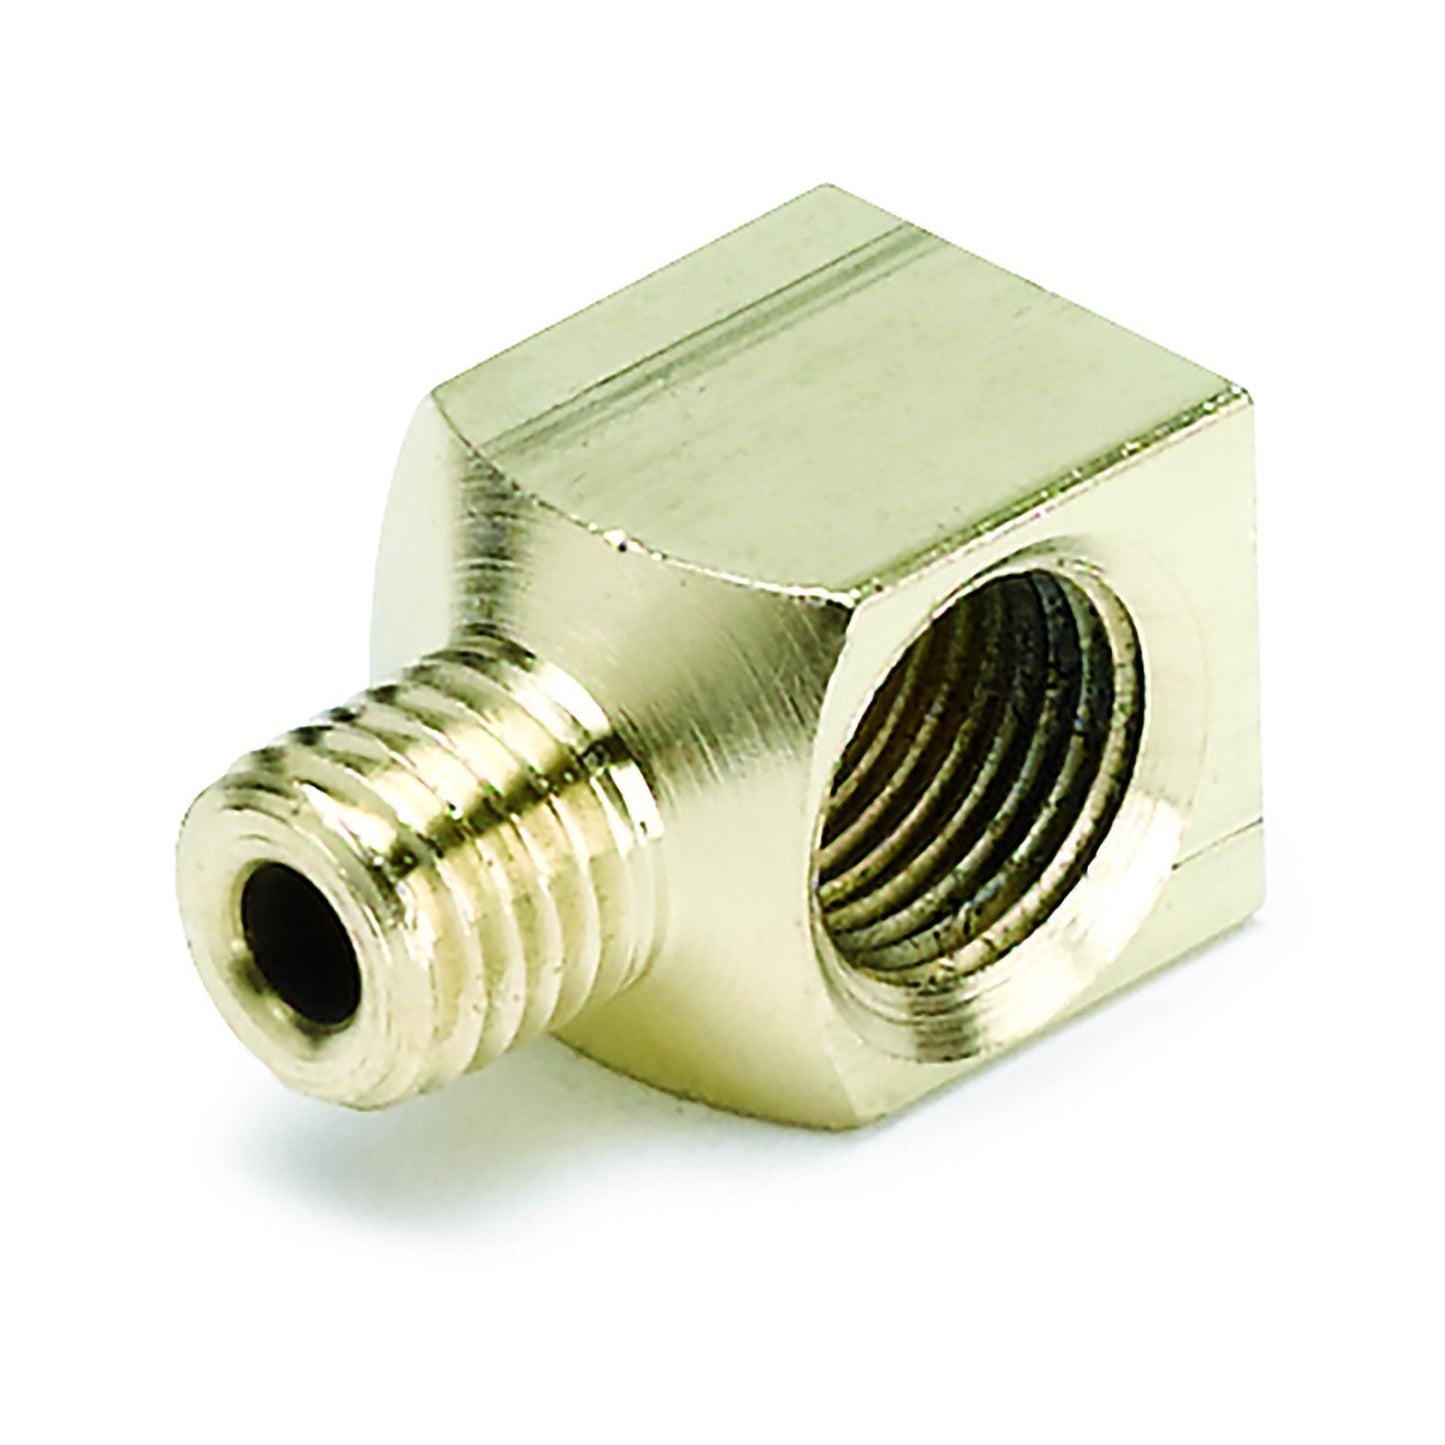 AutoMeter - FITTING, ADAPTER, 90 °, 1/8" NPTF FEMALE TO 1/8" COMPRESSION MALE, BRASS (3272)